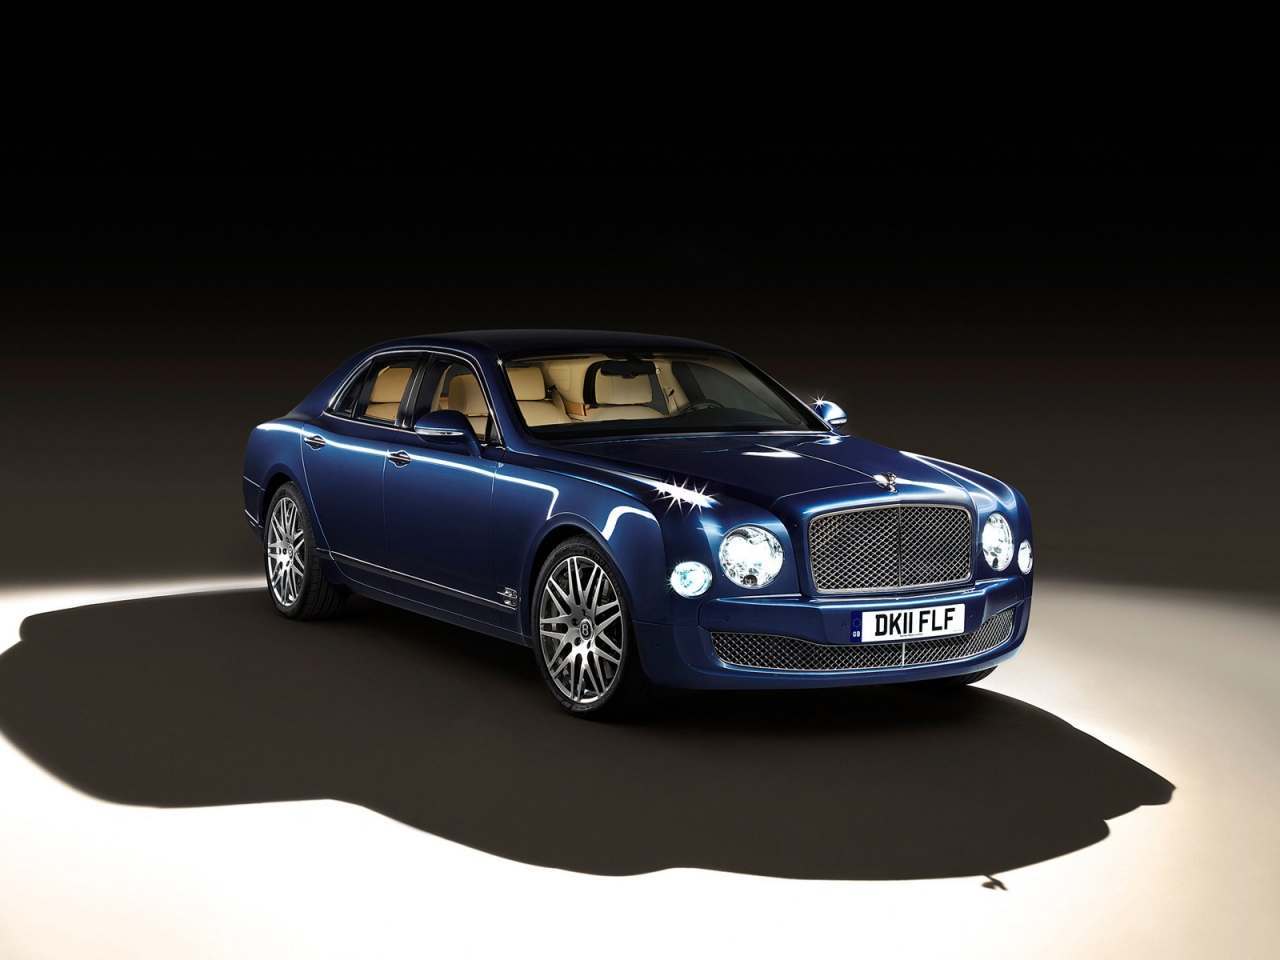 2012 Bentley Mulsanne Executive for 1280 x 960 resolution